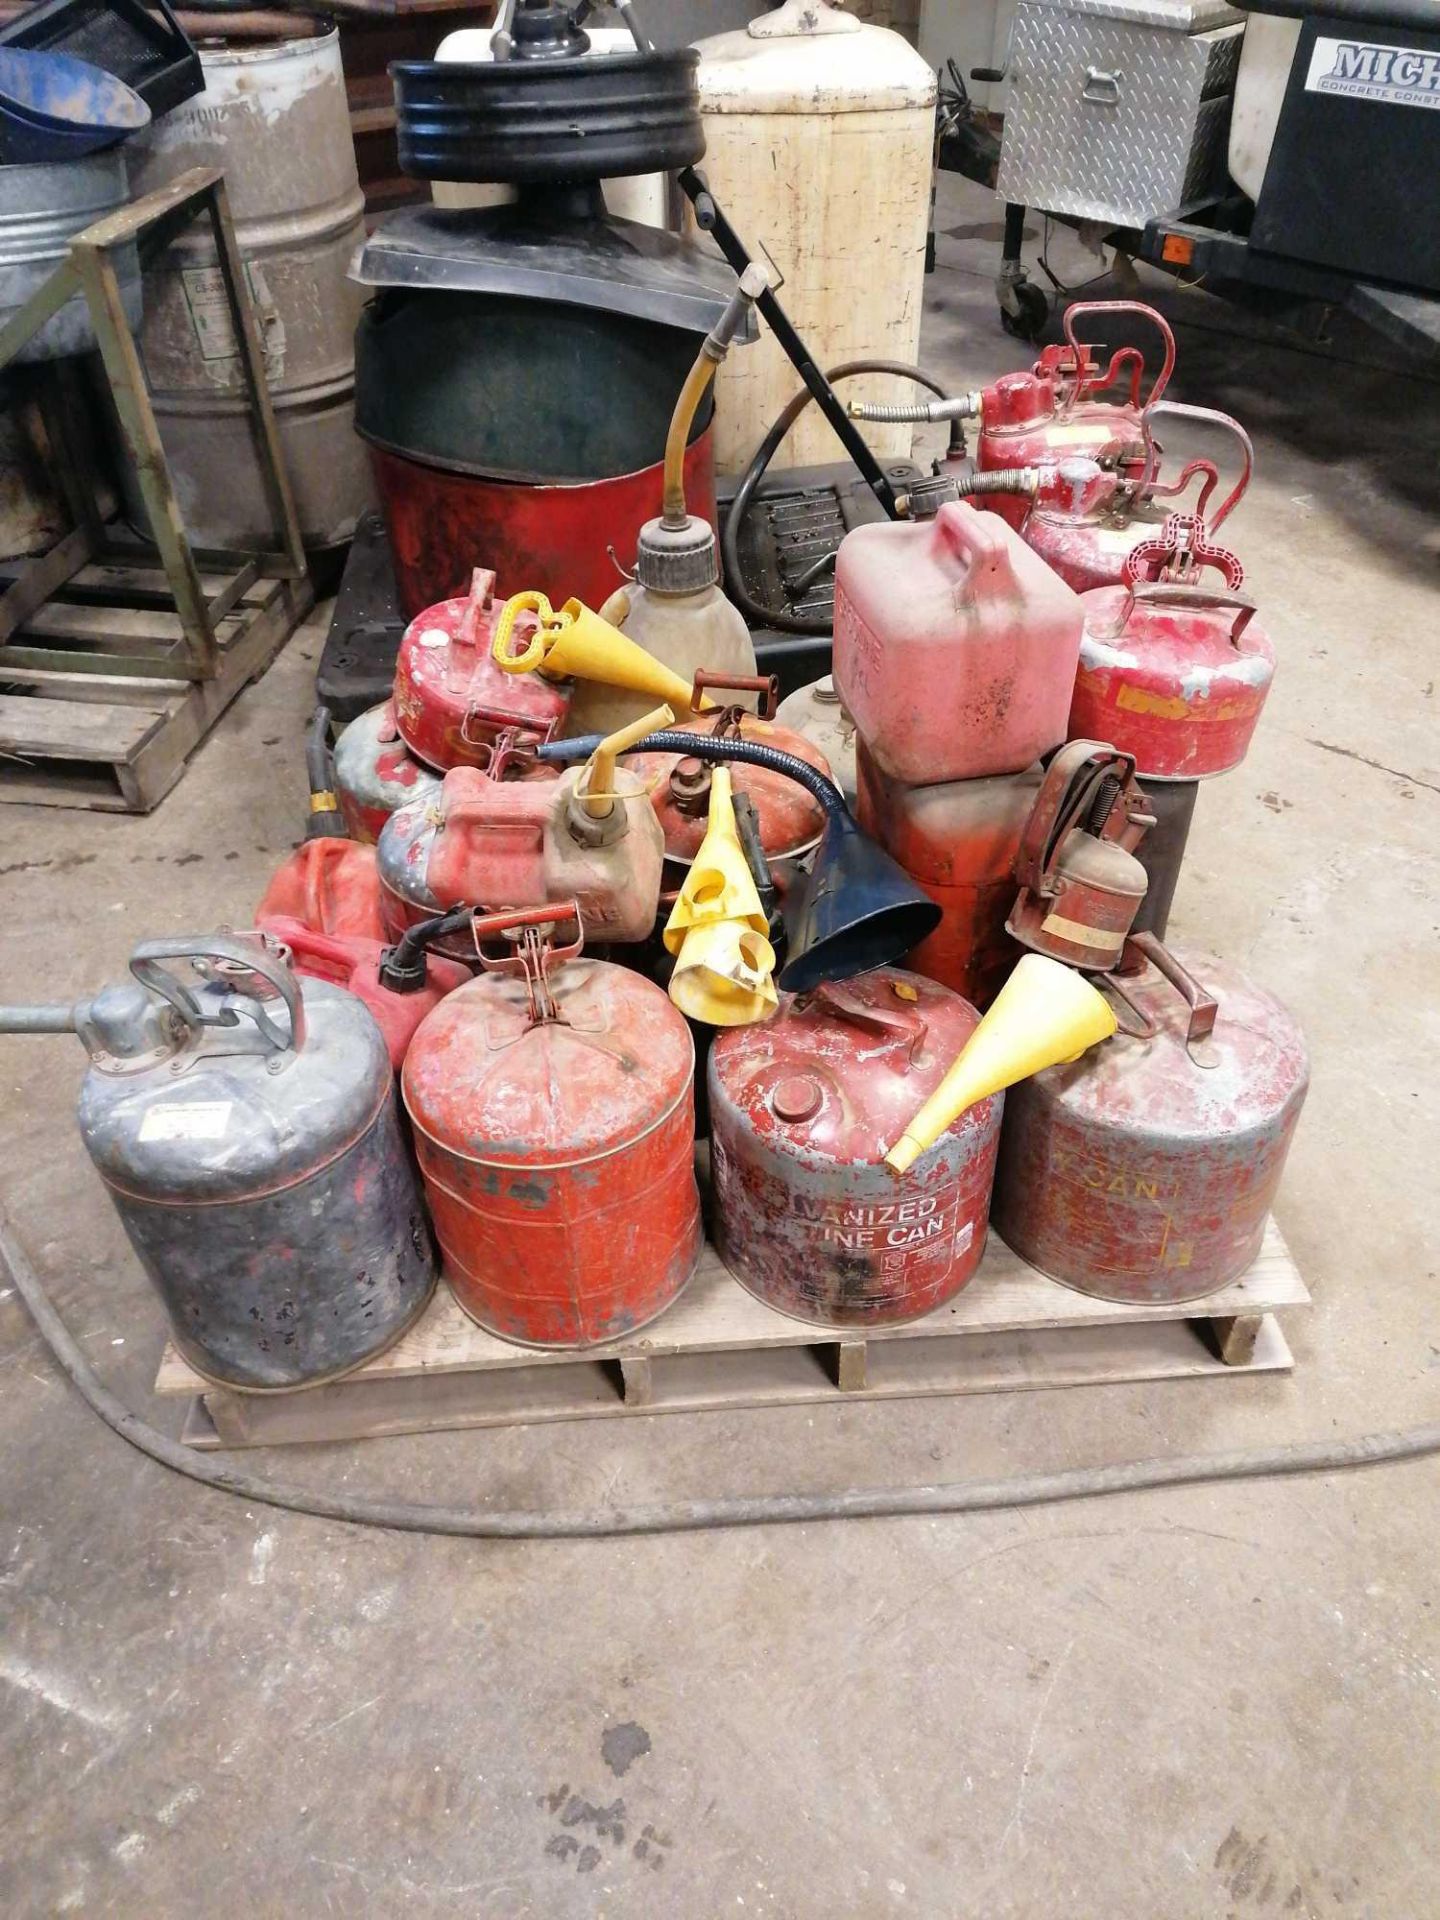 Pallet of Miscellaneous Gas Cans